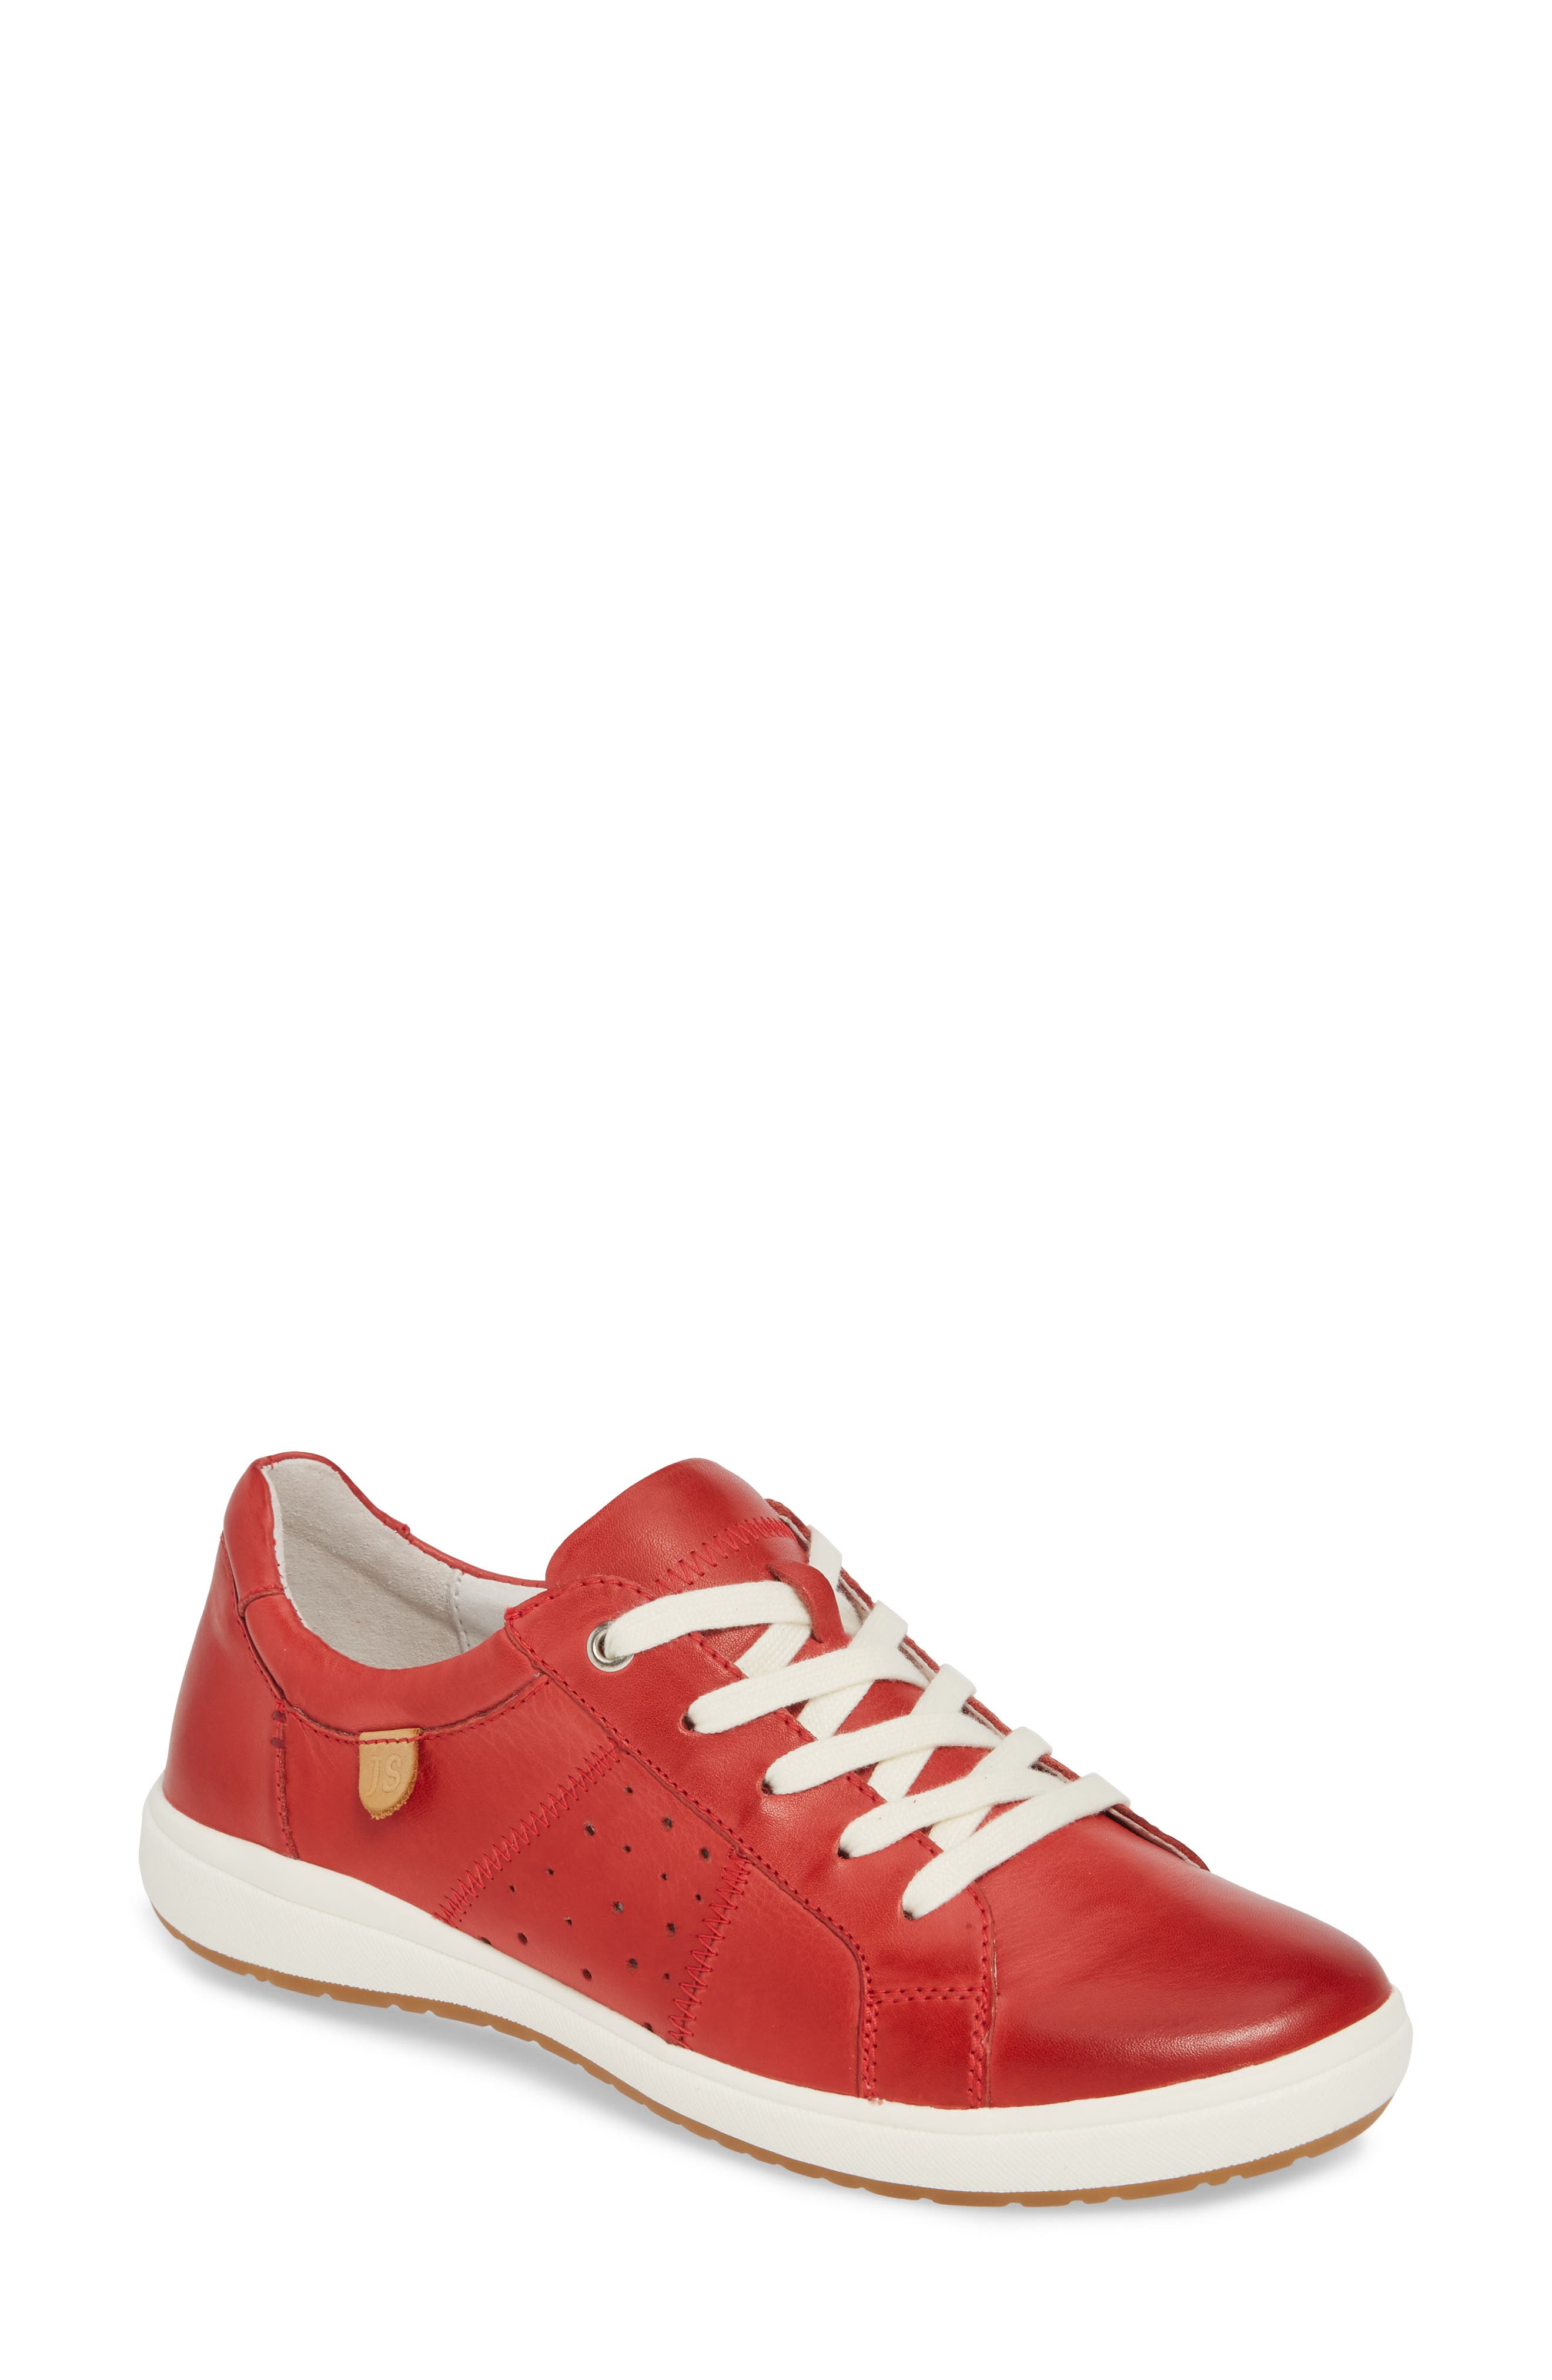 red womans sneakers